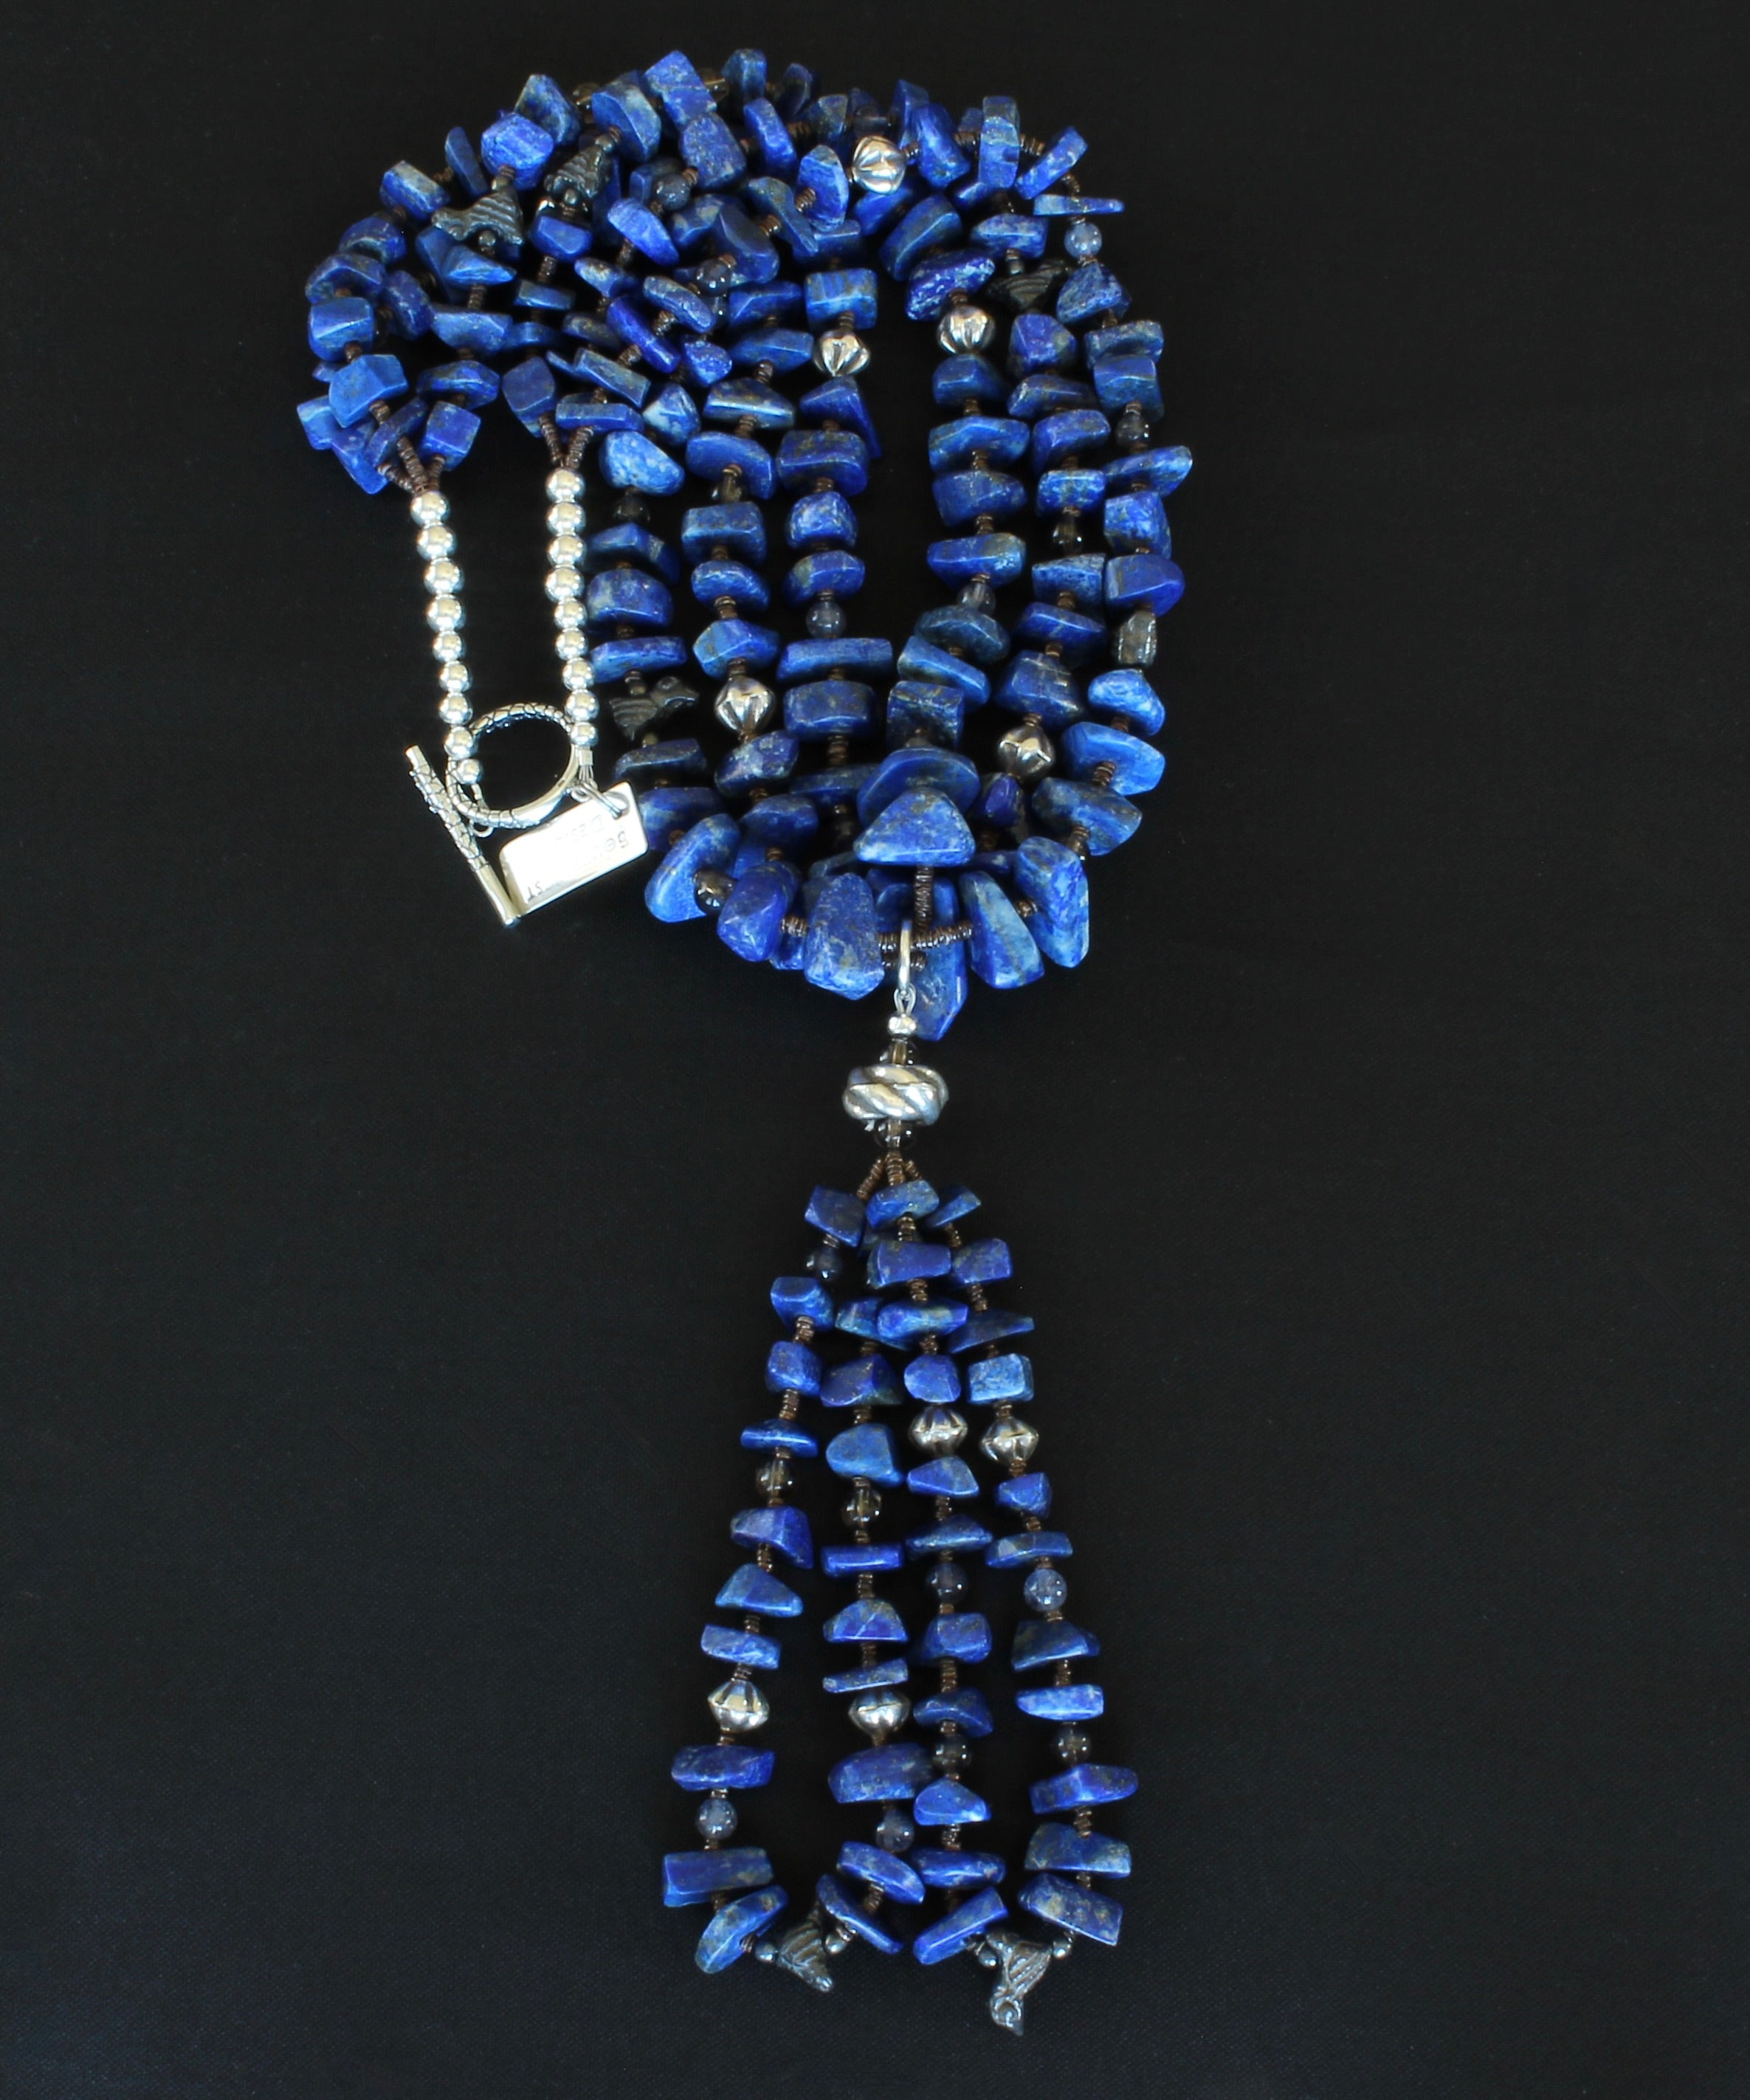 Lapis Long Chip 3-Strand Necklace with Jacla, Bird Amulets, Iolite & Smoky Quartz, and Sterling Silver Beads & Toggle Clasp